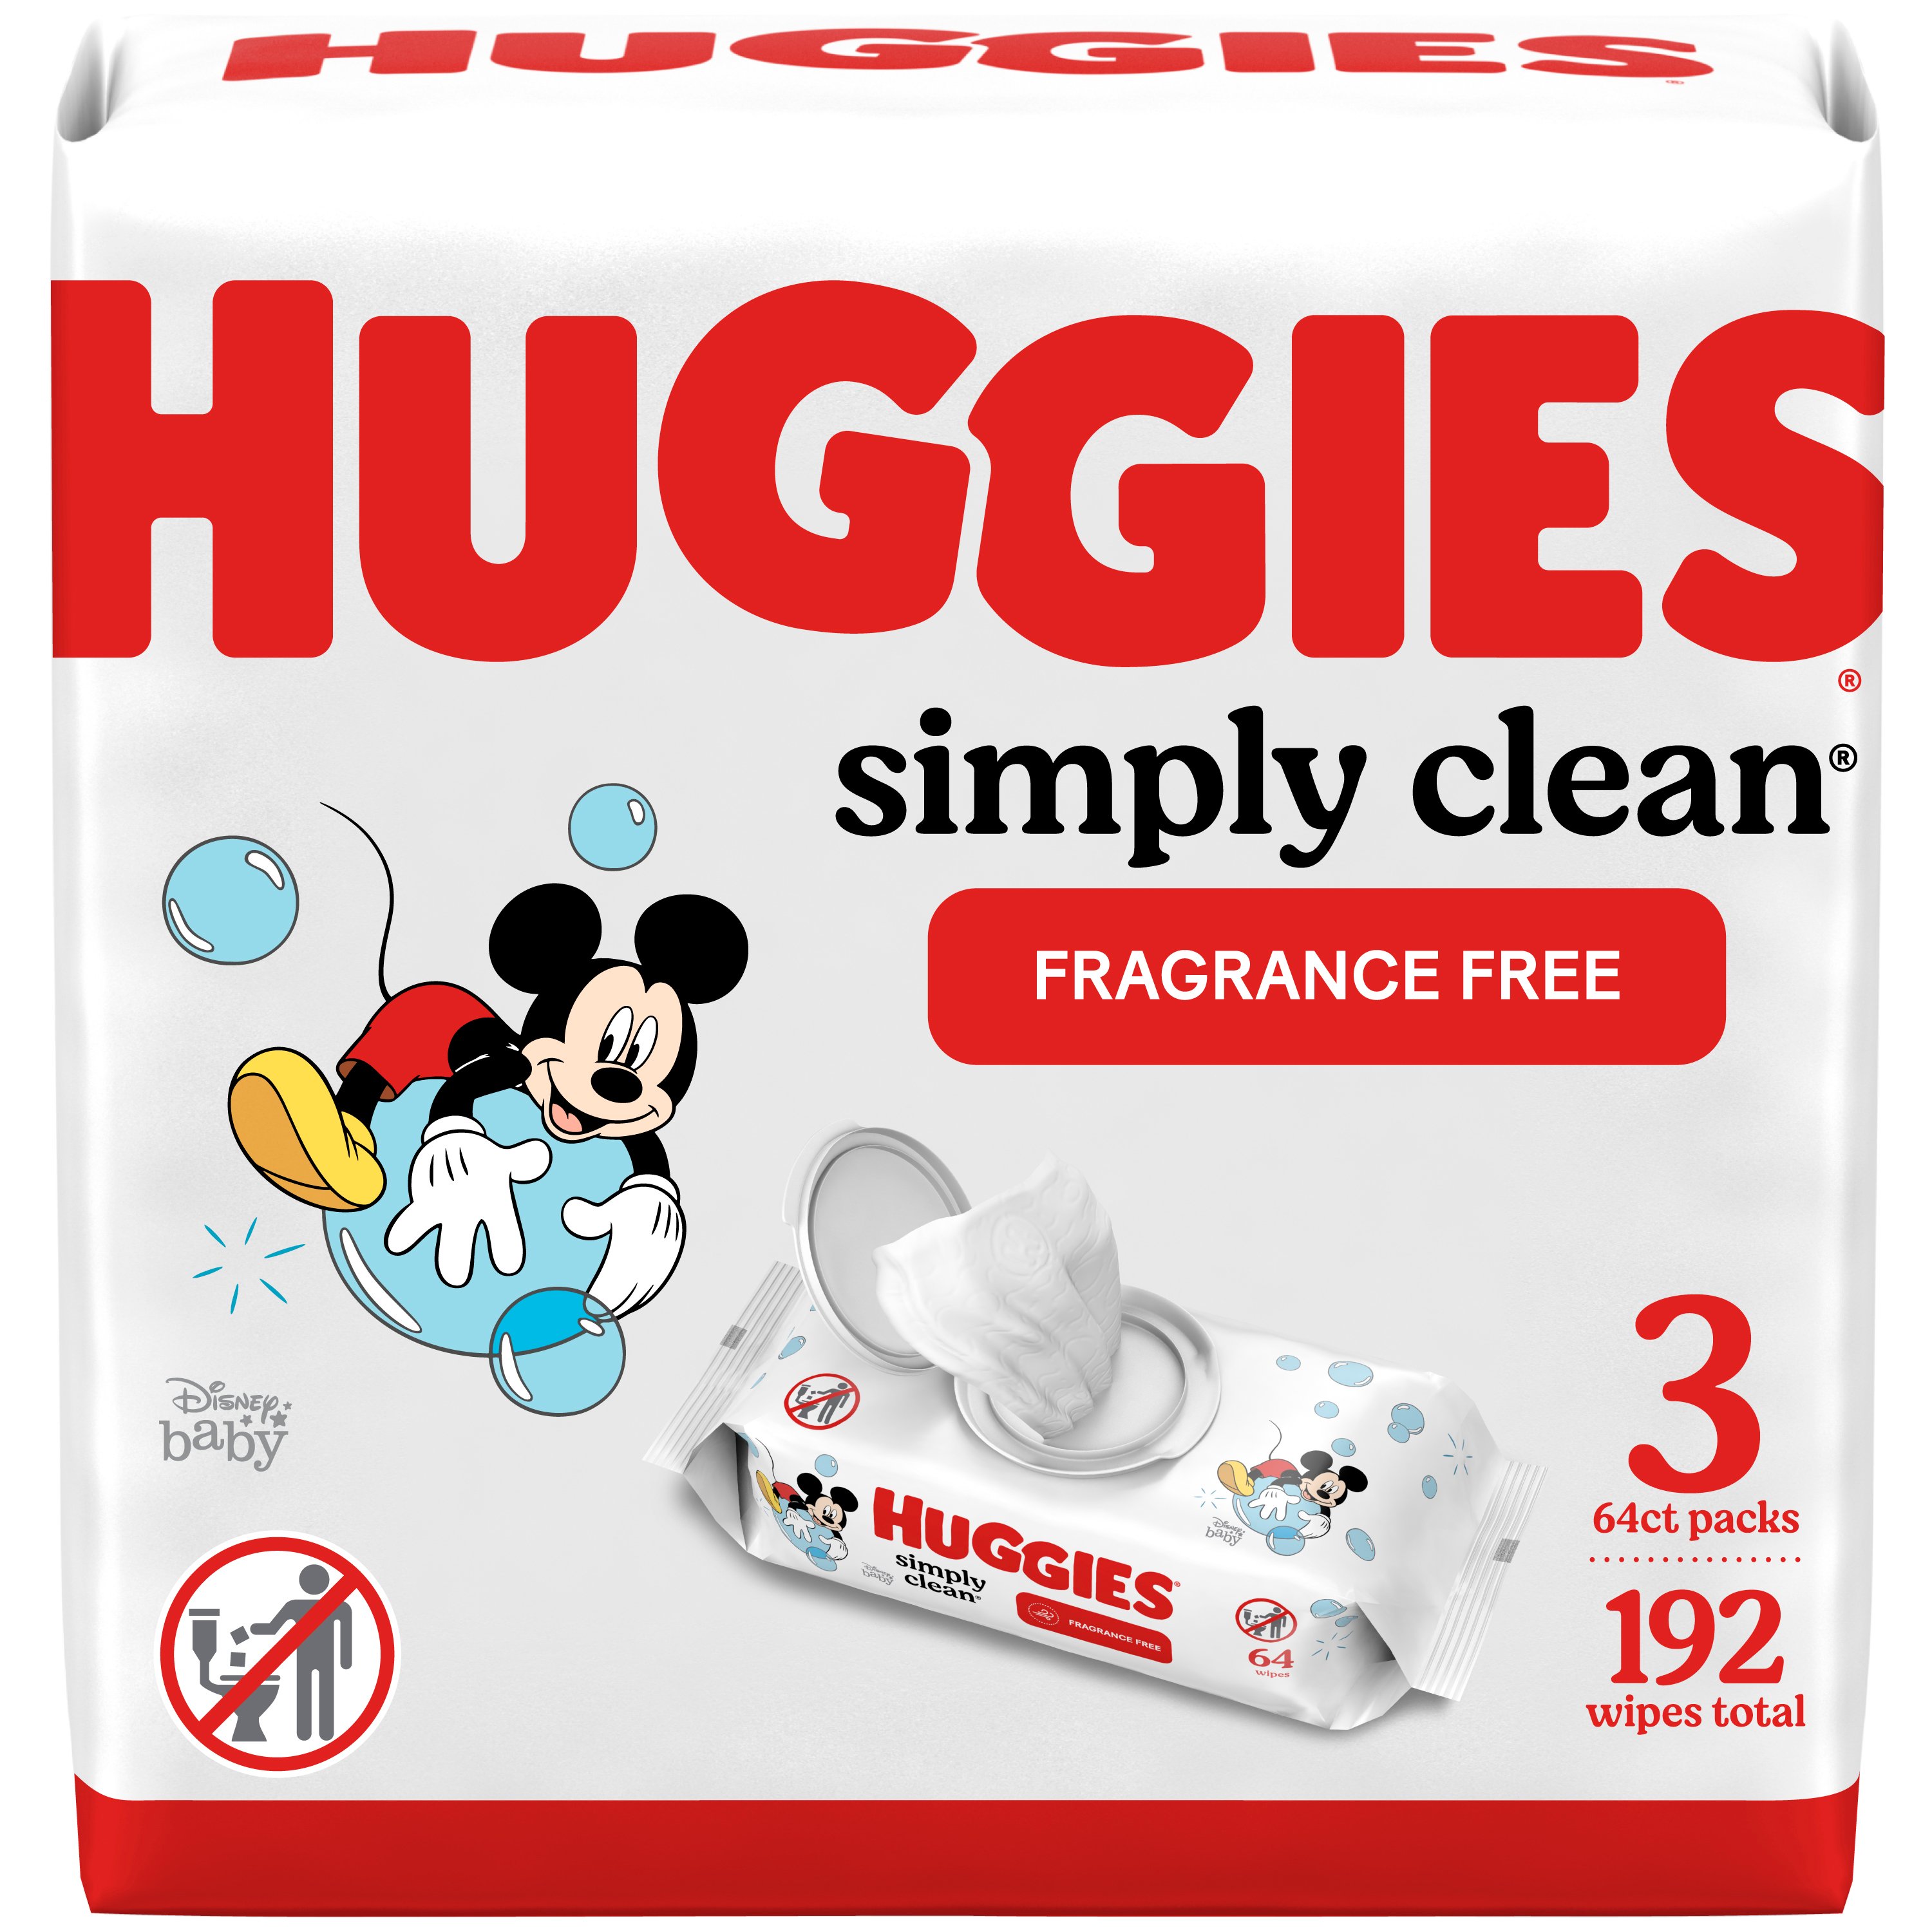 Huggies Simply Clean Fragrance Free Wipes - Shop Baby Wipes at H-E-B